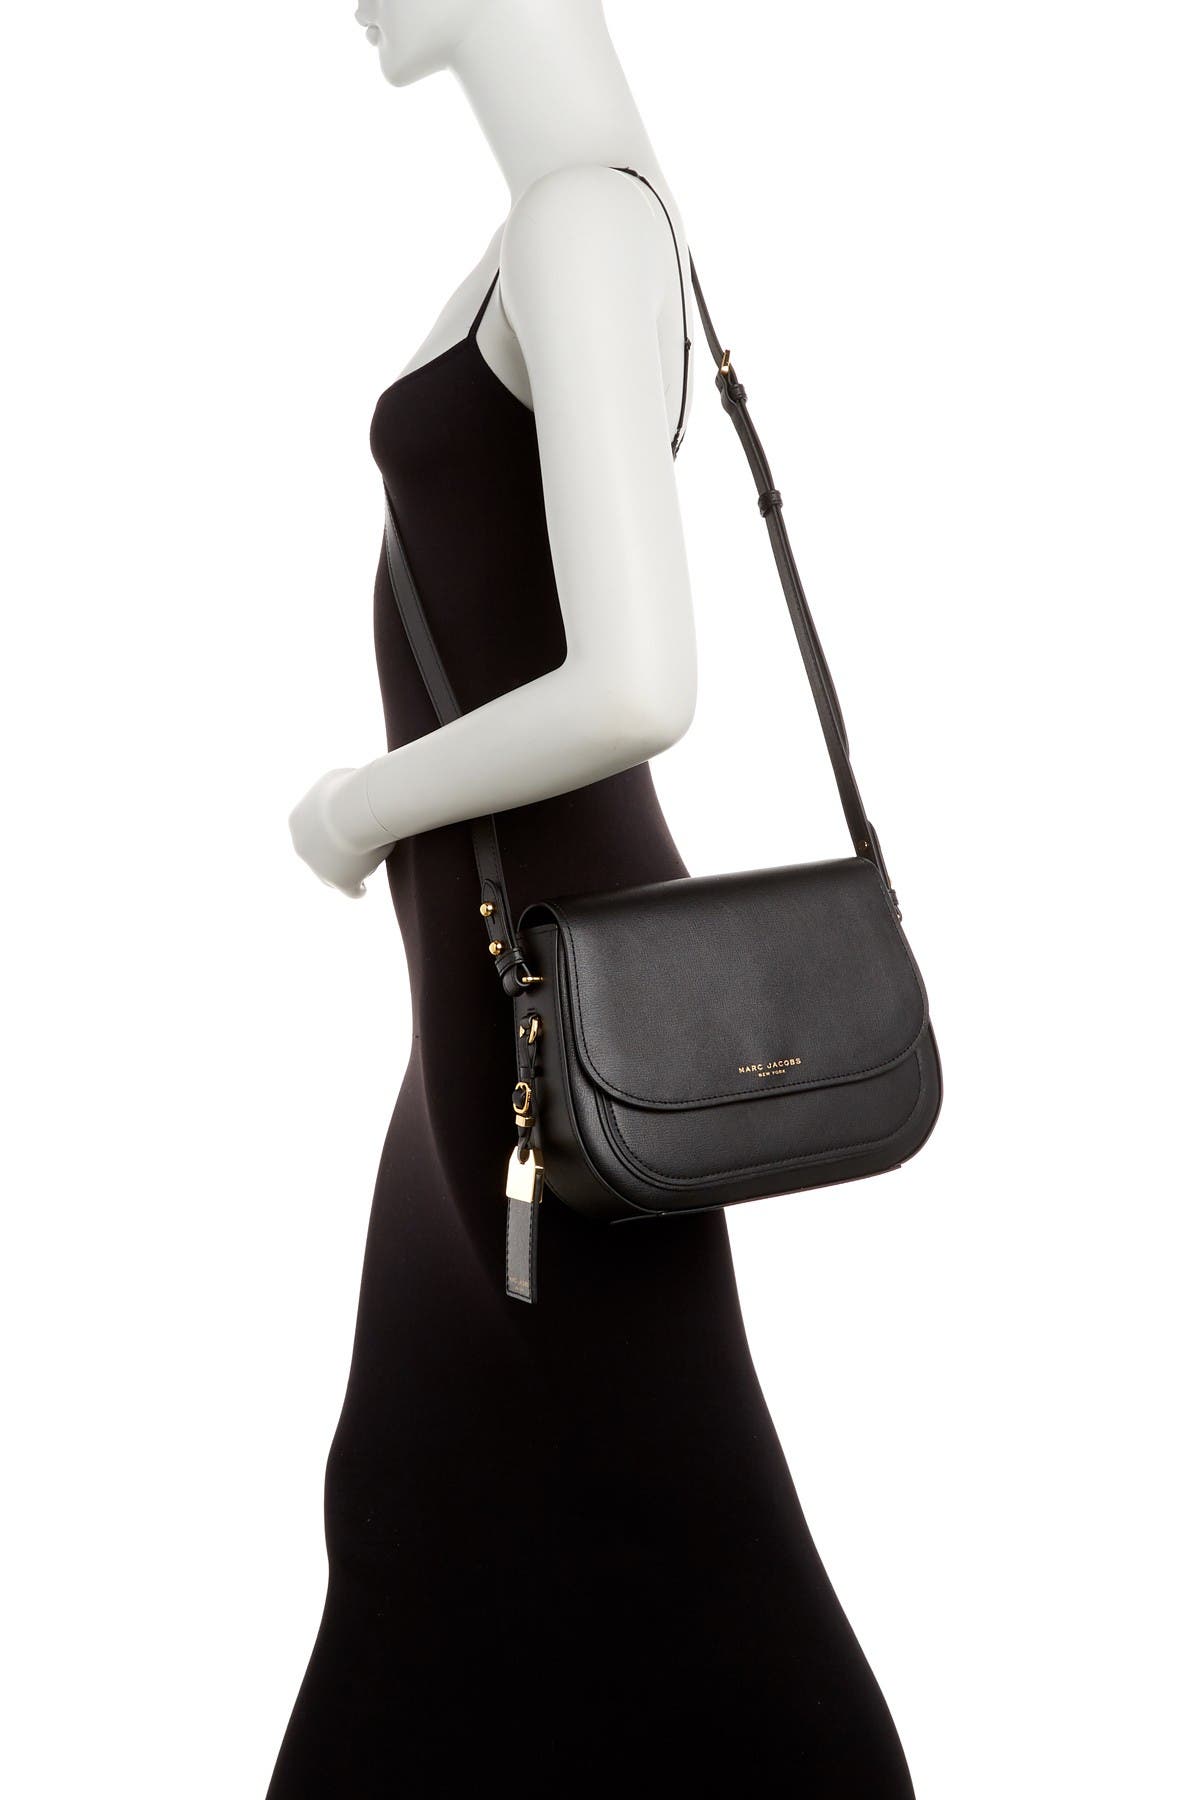 marc jacobs rider leather crossbody bag